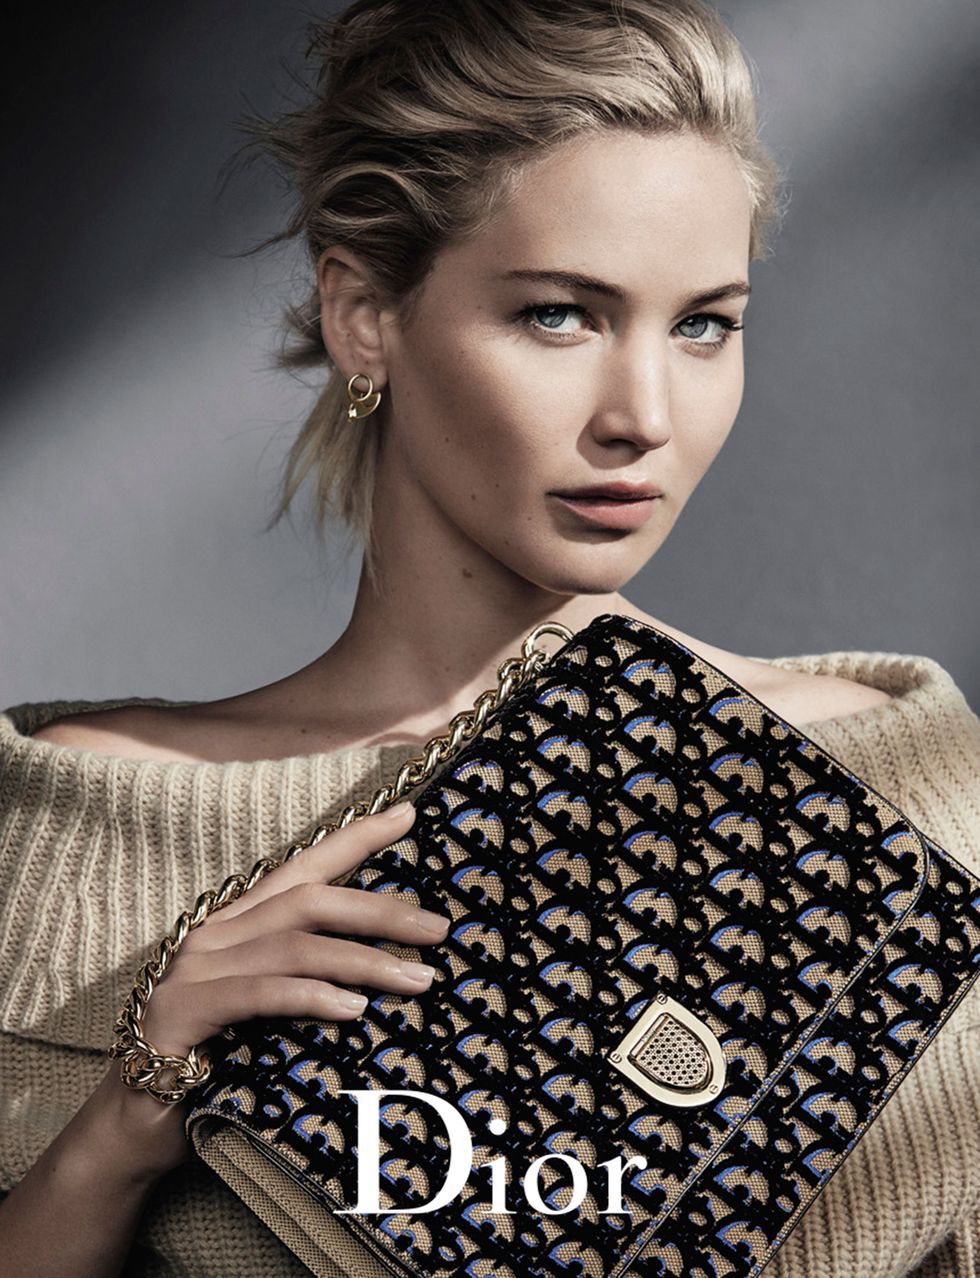 Jennifer Lawrence for Dior - behind the scenes video